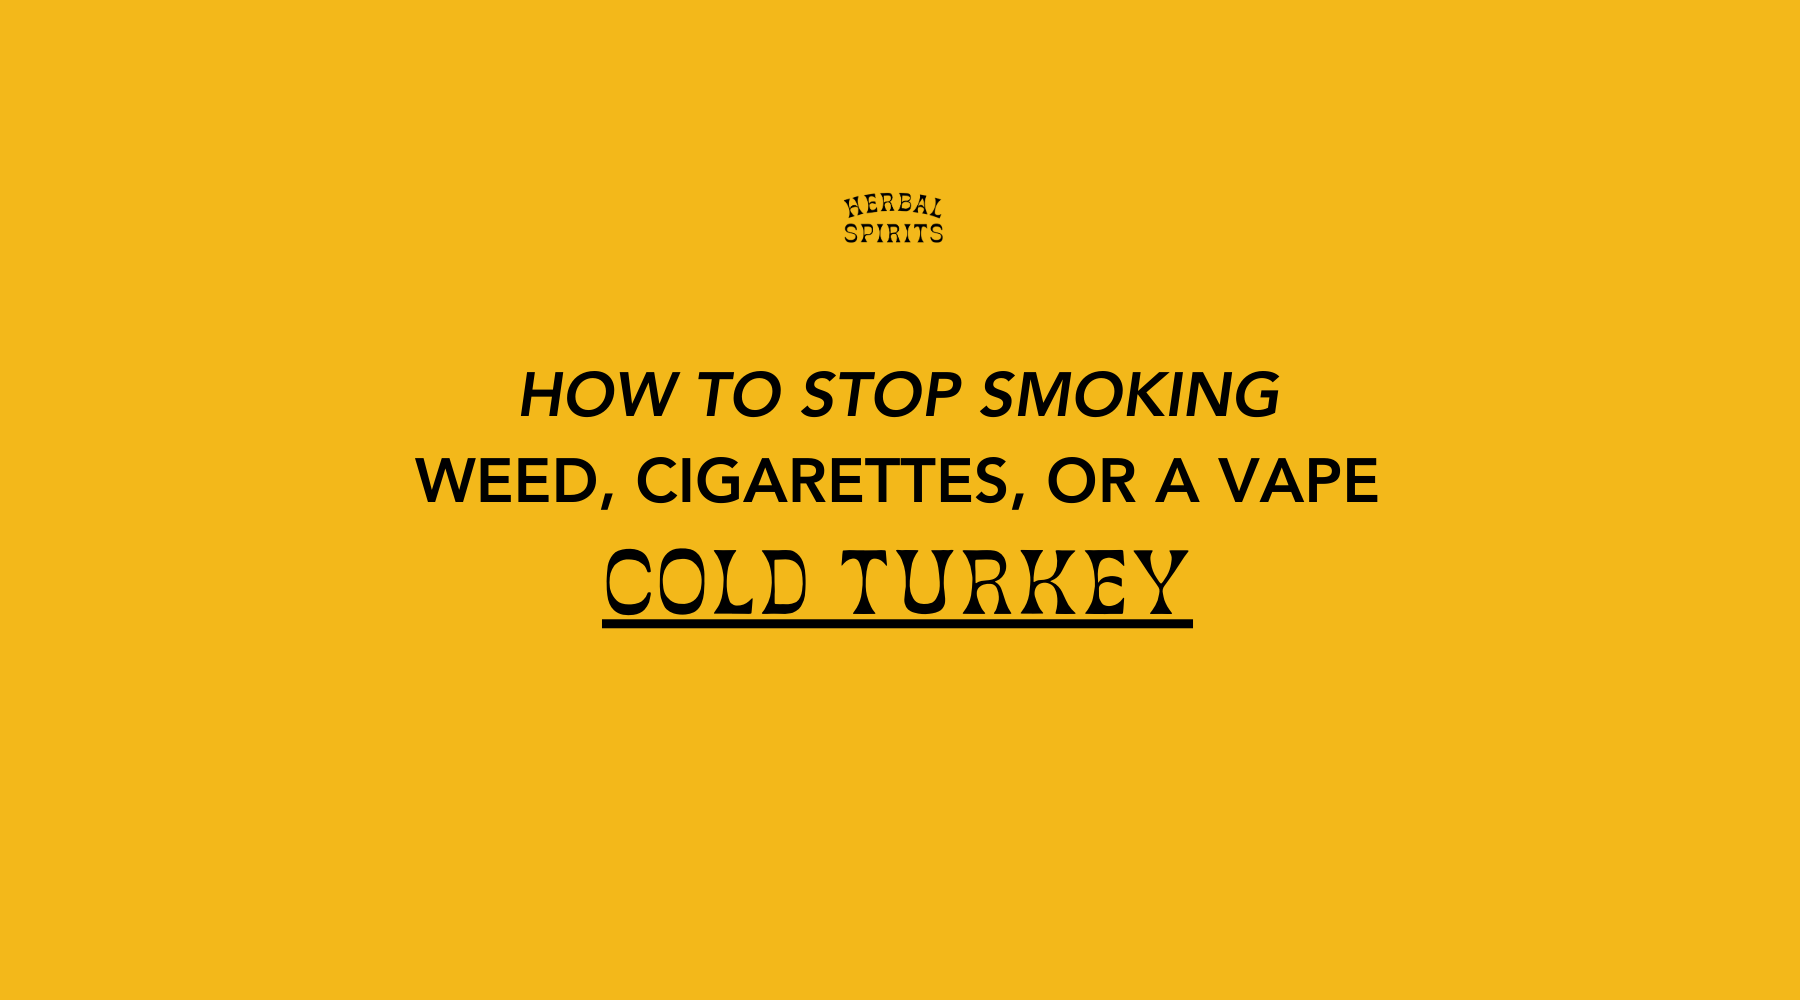 How To Stop Smoking Weed, Cigarettes, Or A Vape Cold Turkey